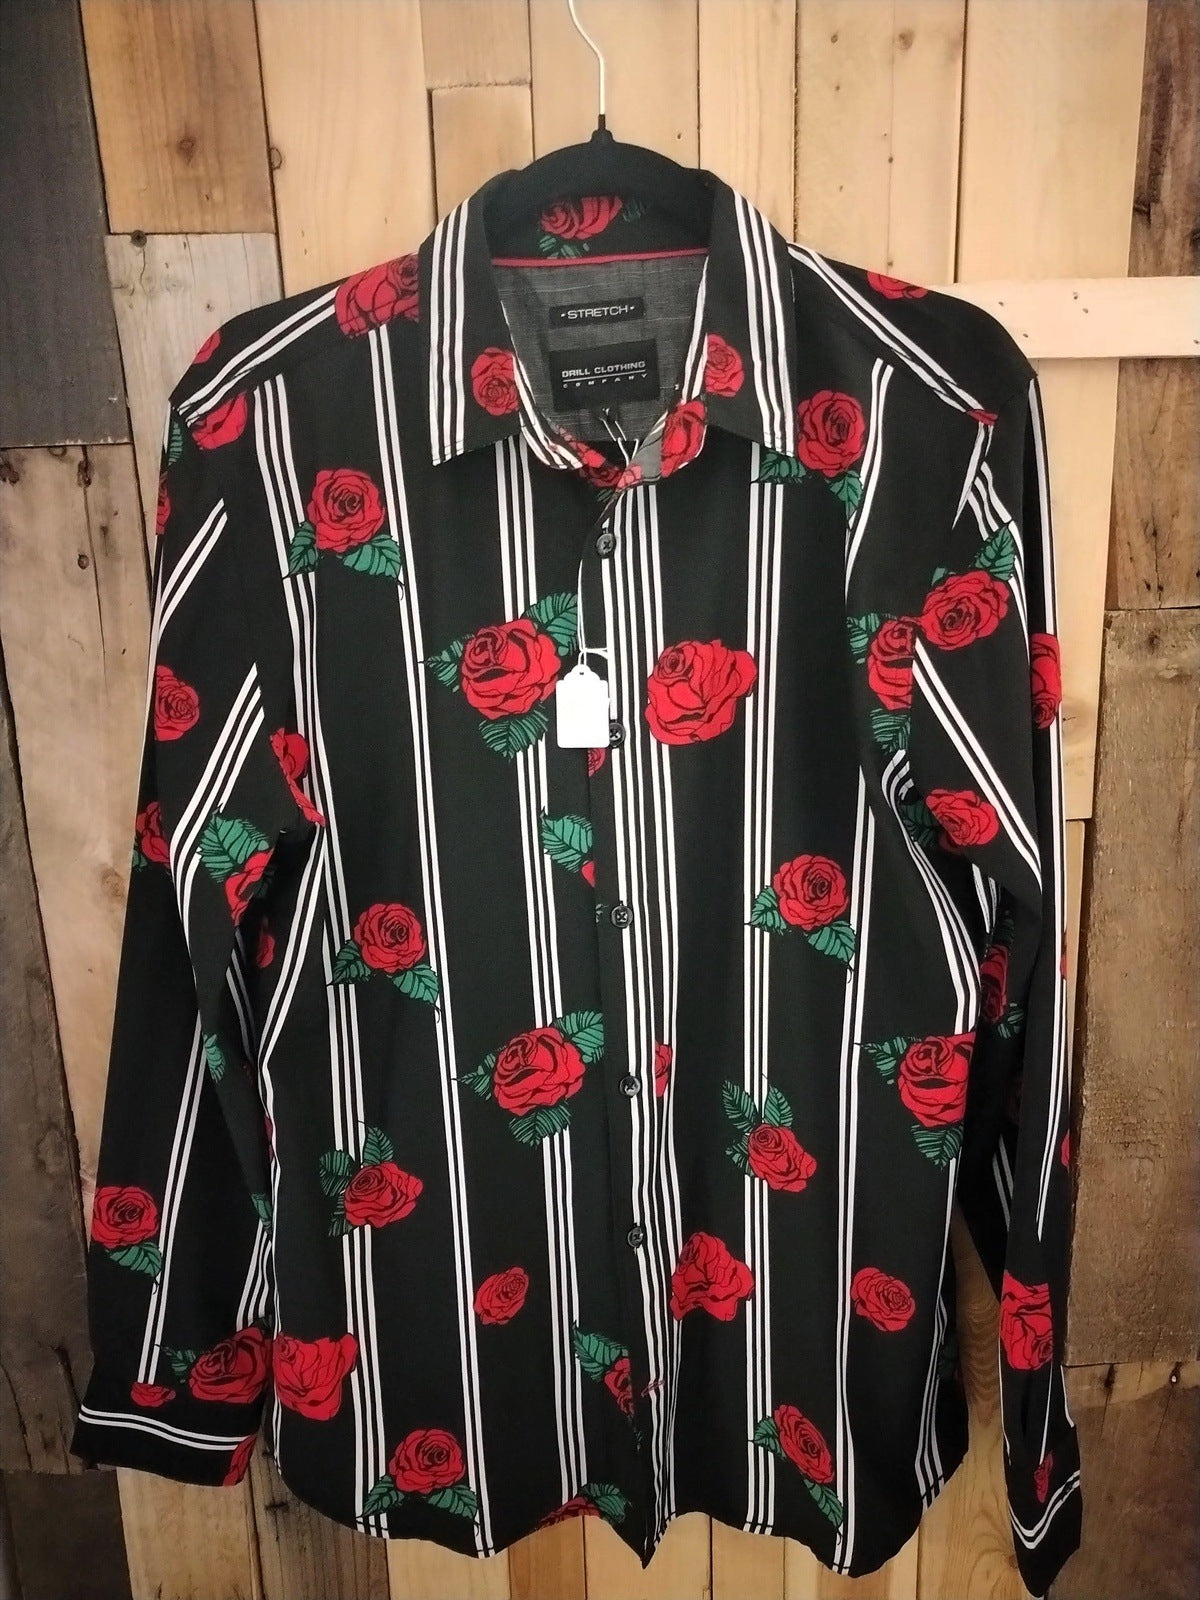 Drill Clothing Company Men's Long Sleeve Stretch Button Up Shirt Roses